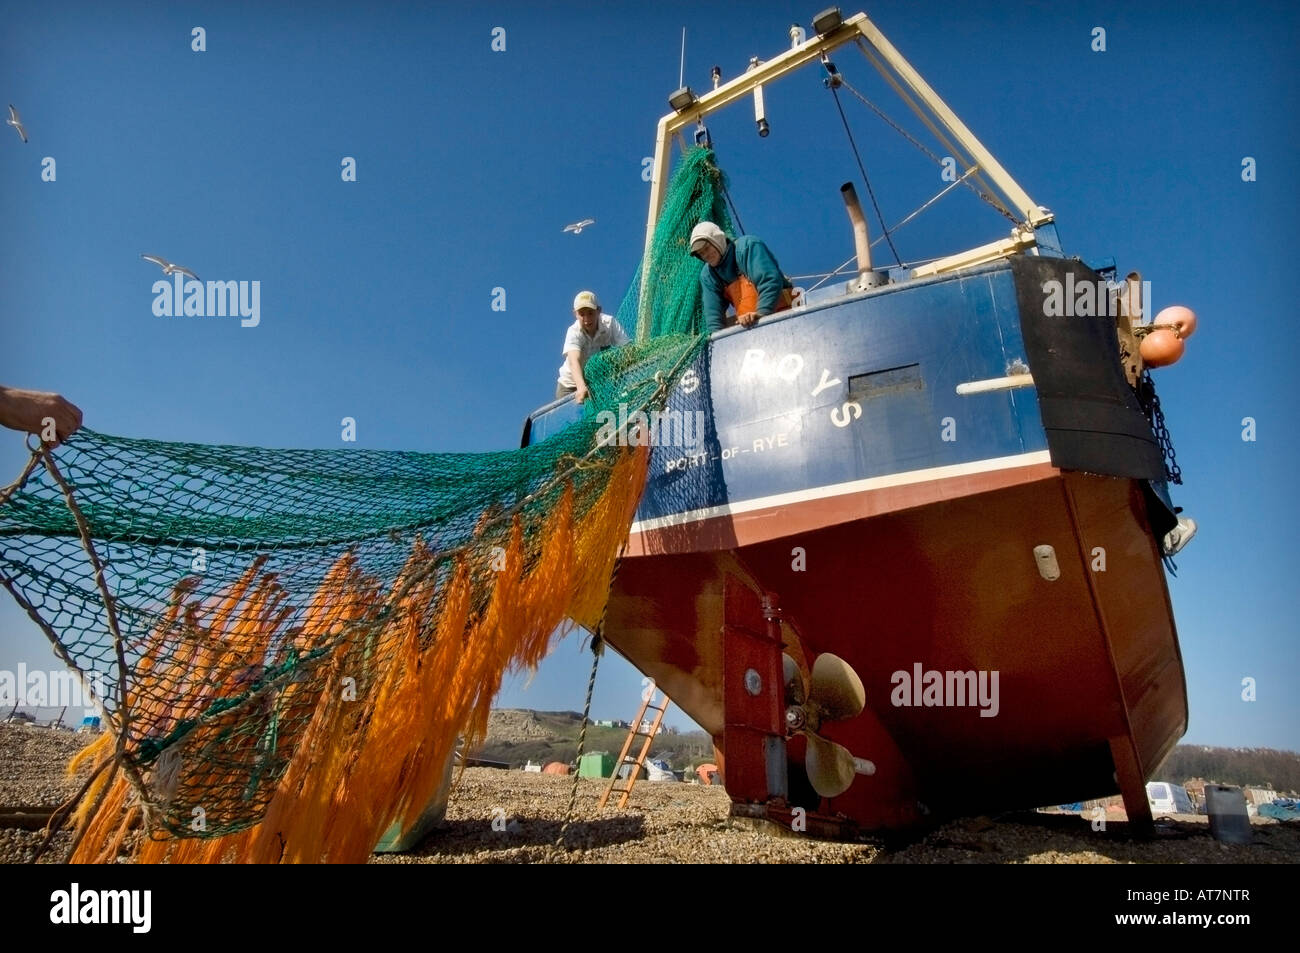 Two crewmen from the small fishing boat Roys Boys check the fishing nets after being winched up Hastings beach Stock Photo